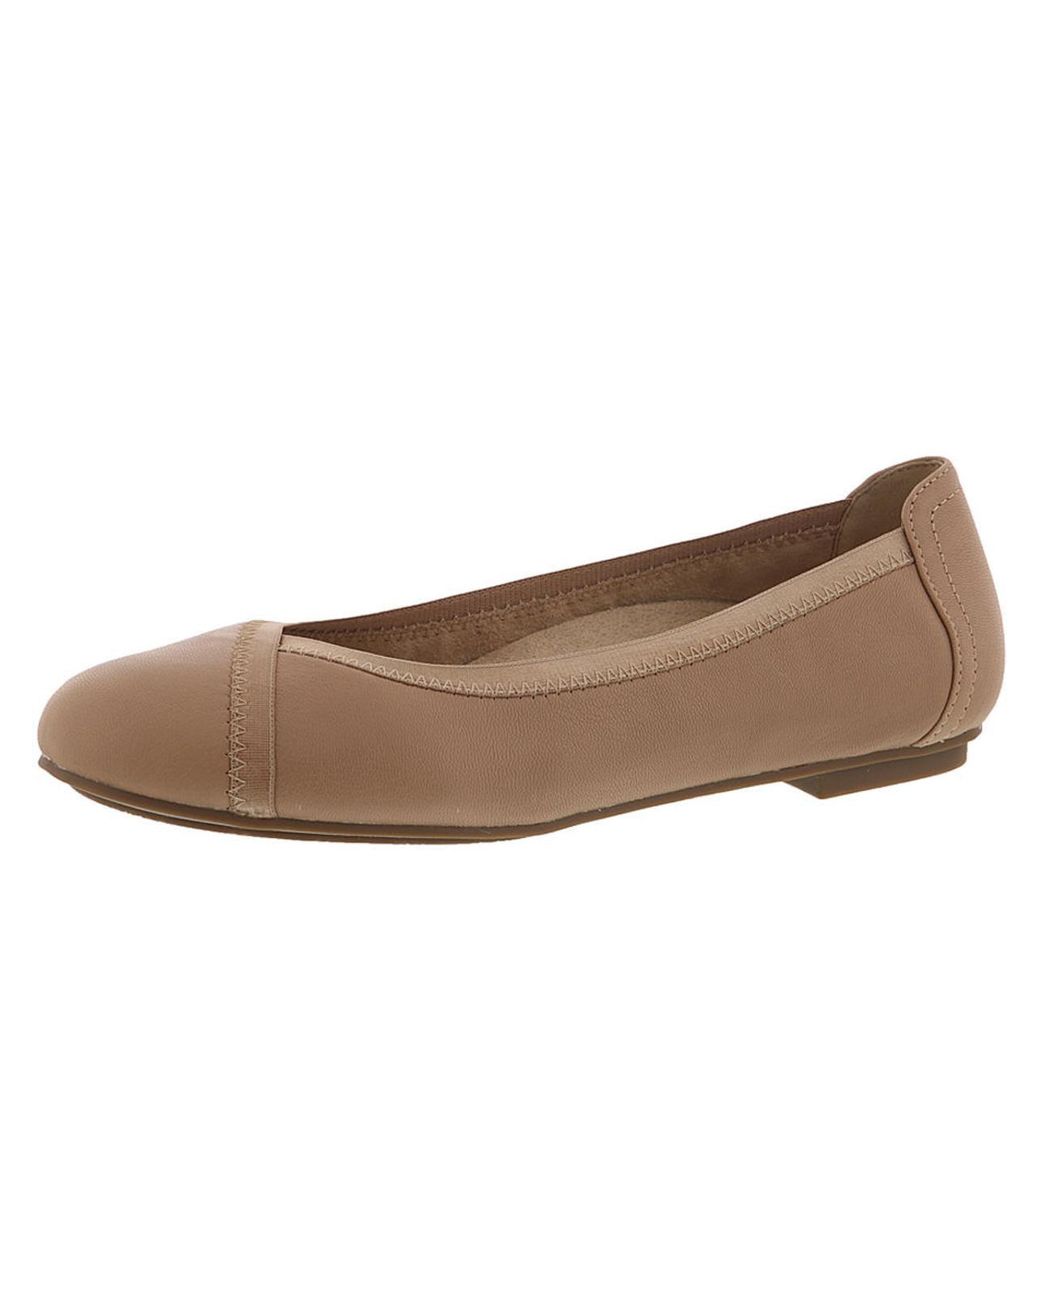 Vionic Caroll Leather Slip On Ballet Flats in Brown | Lyst